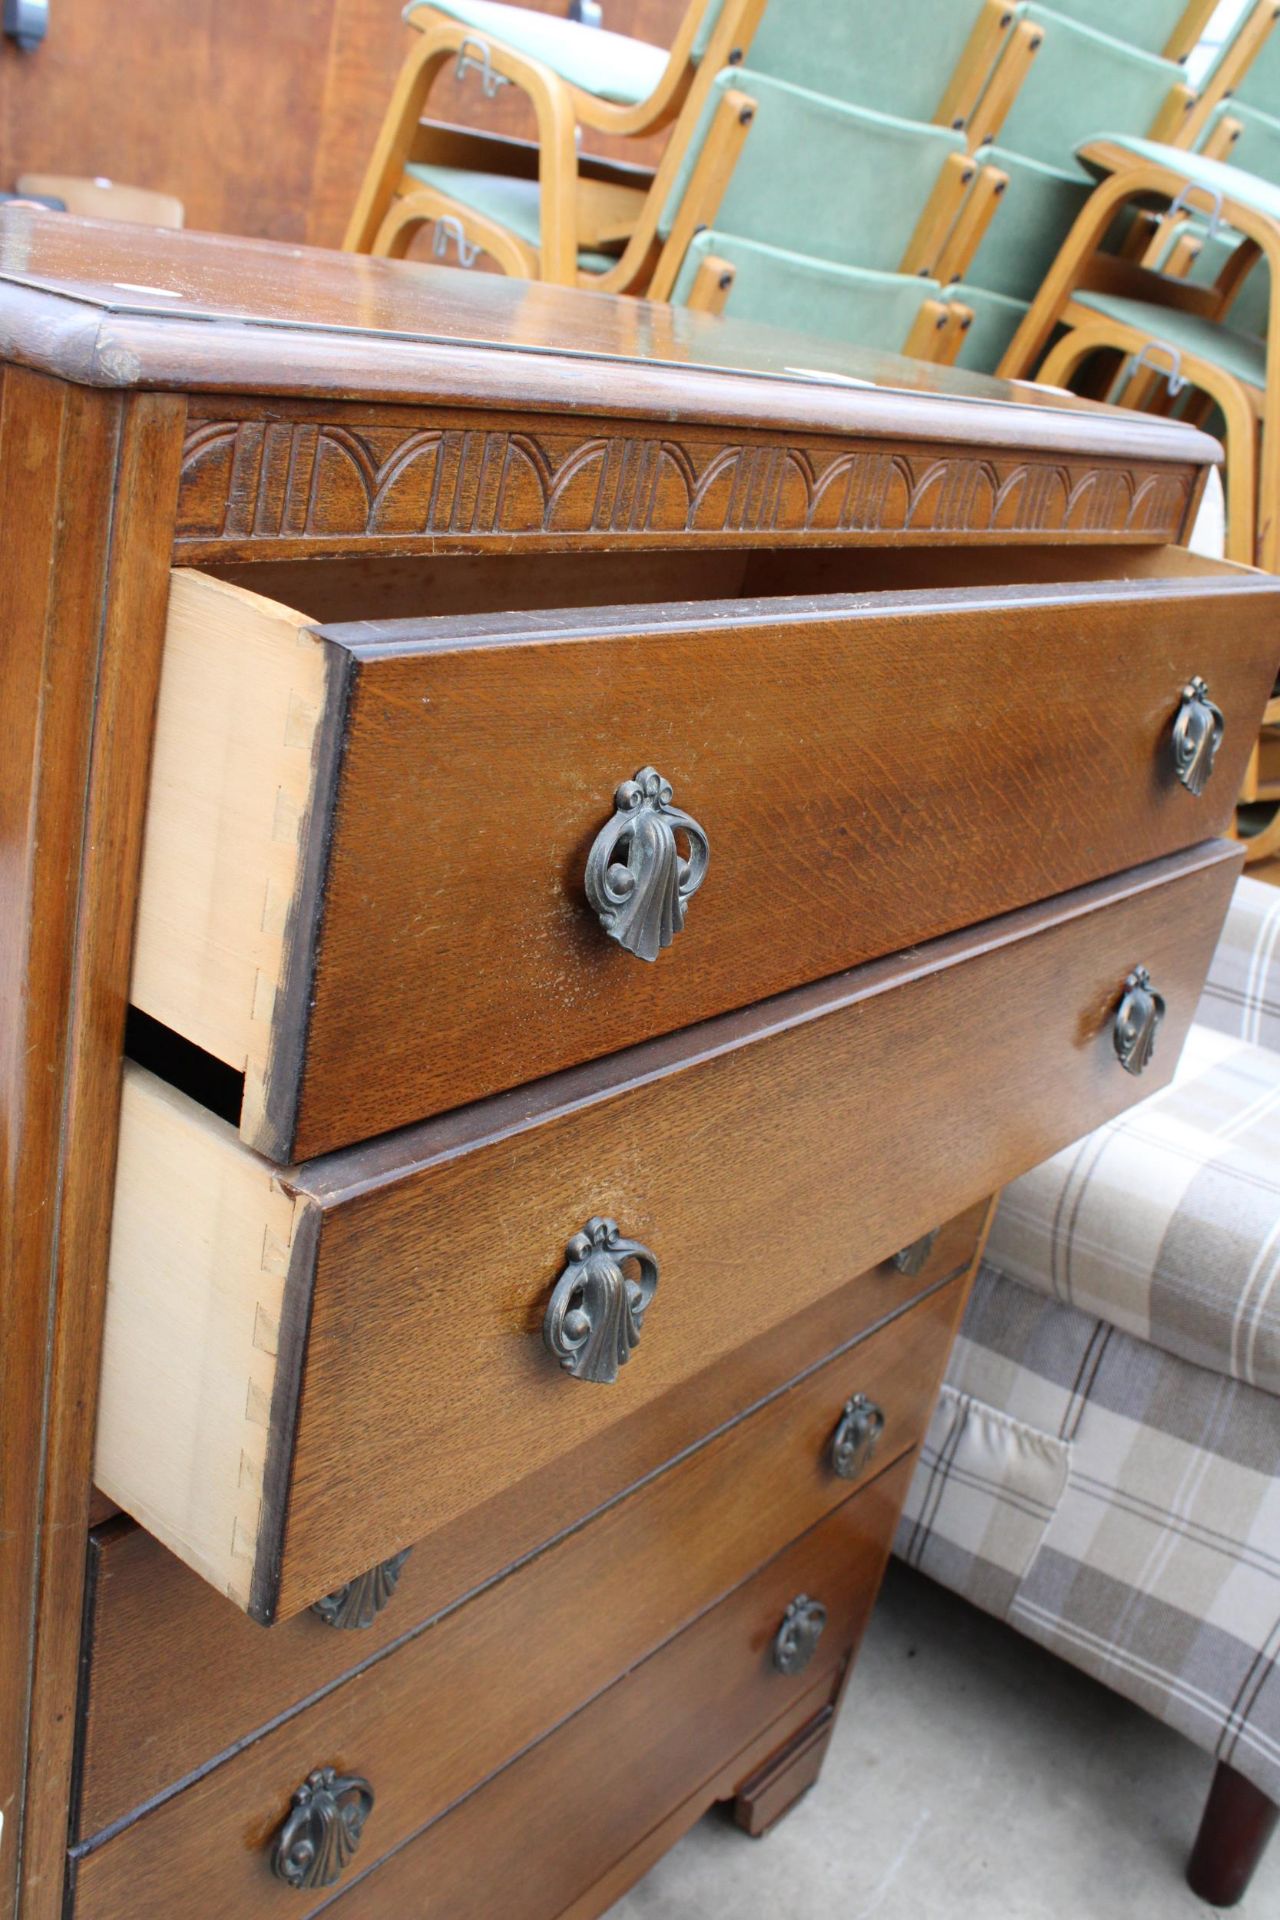 A MID 20TH CENTURY CHEST OF 5 DRAWERS 30" WIDE - Image 2 of 2